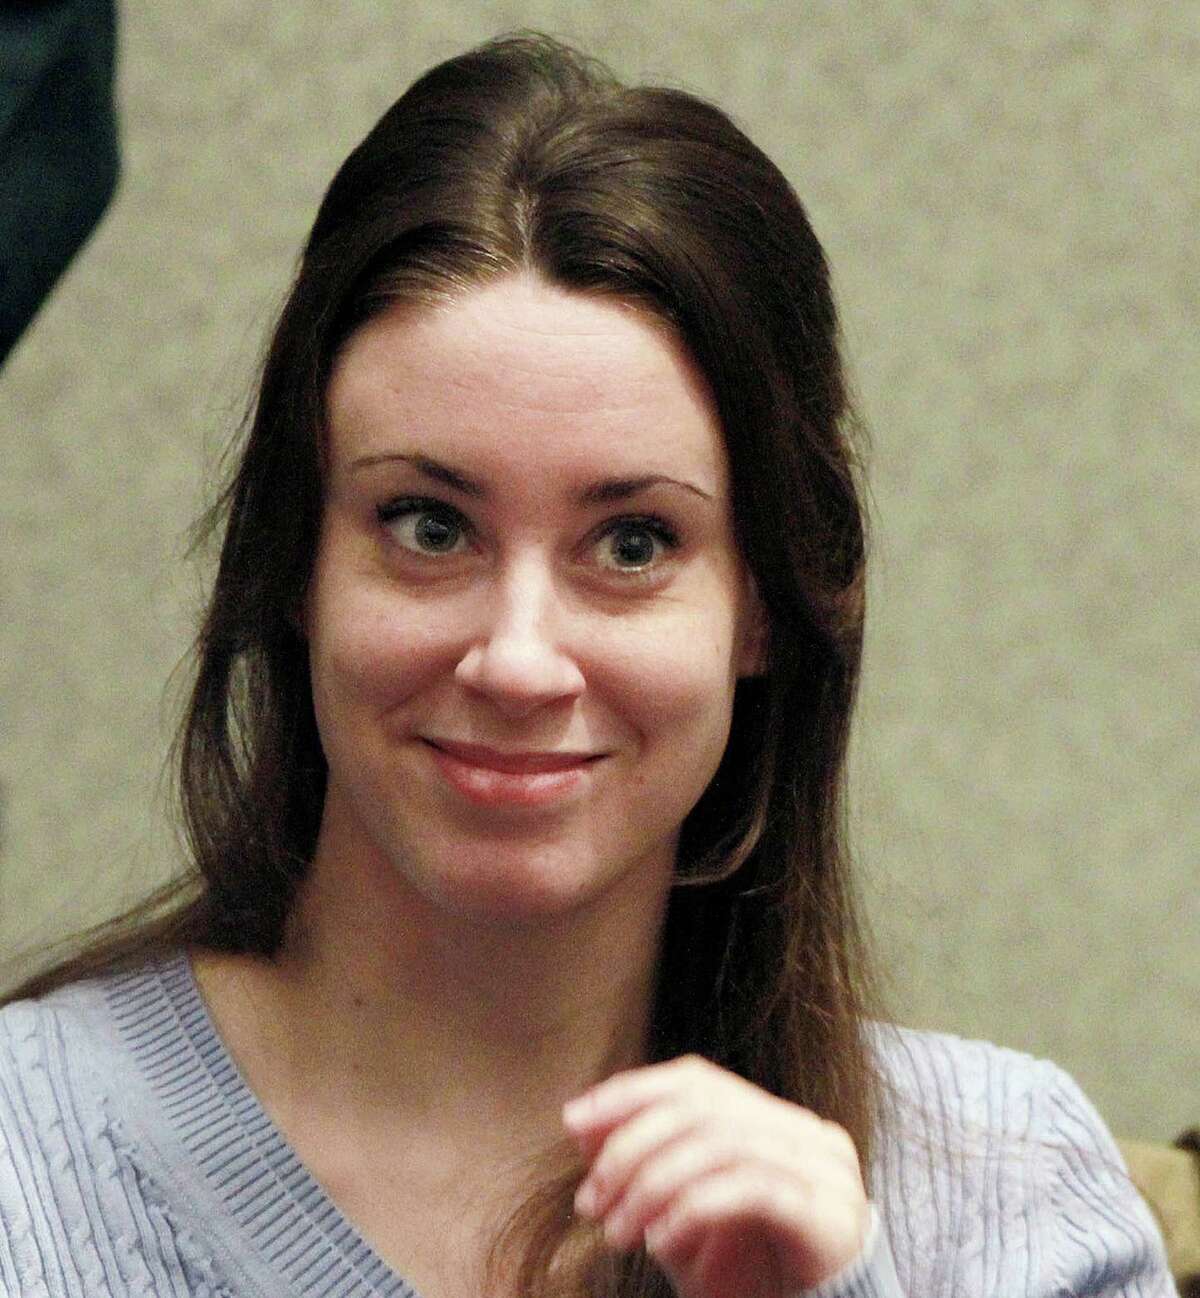 Casey Anthony, the Florida mother who was acquitted of killing her 2-year-old daughter Caylee in 2011, has filed for bankruptcy, The Associated Press reports. Anthony filed for Chapter 7 bankruptcy in Tampa Friday, claiming about $1,000 in assets and $792,000 in debts, according to the AP. Many of the liabilities come from legal fees associated with her trial, as well as taxes and a $145,660 fee she was ordered to pay the Orange County Sheriff's office for misleading police during the investigation into Caylee's murder.